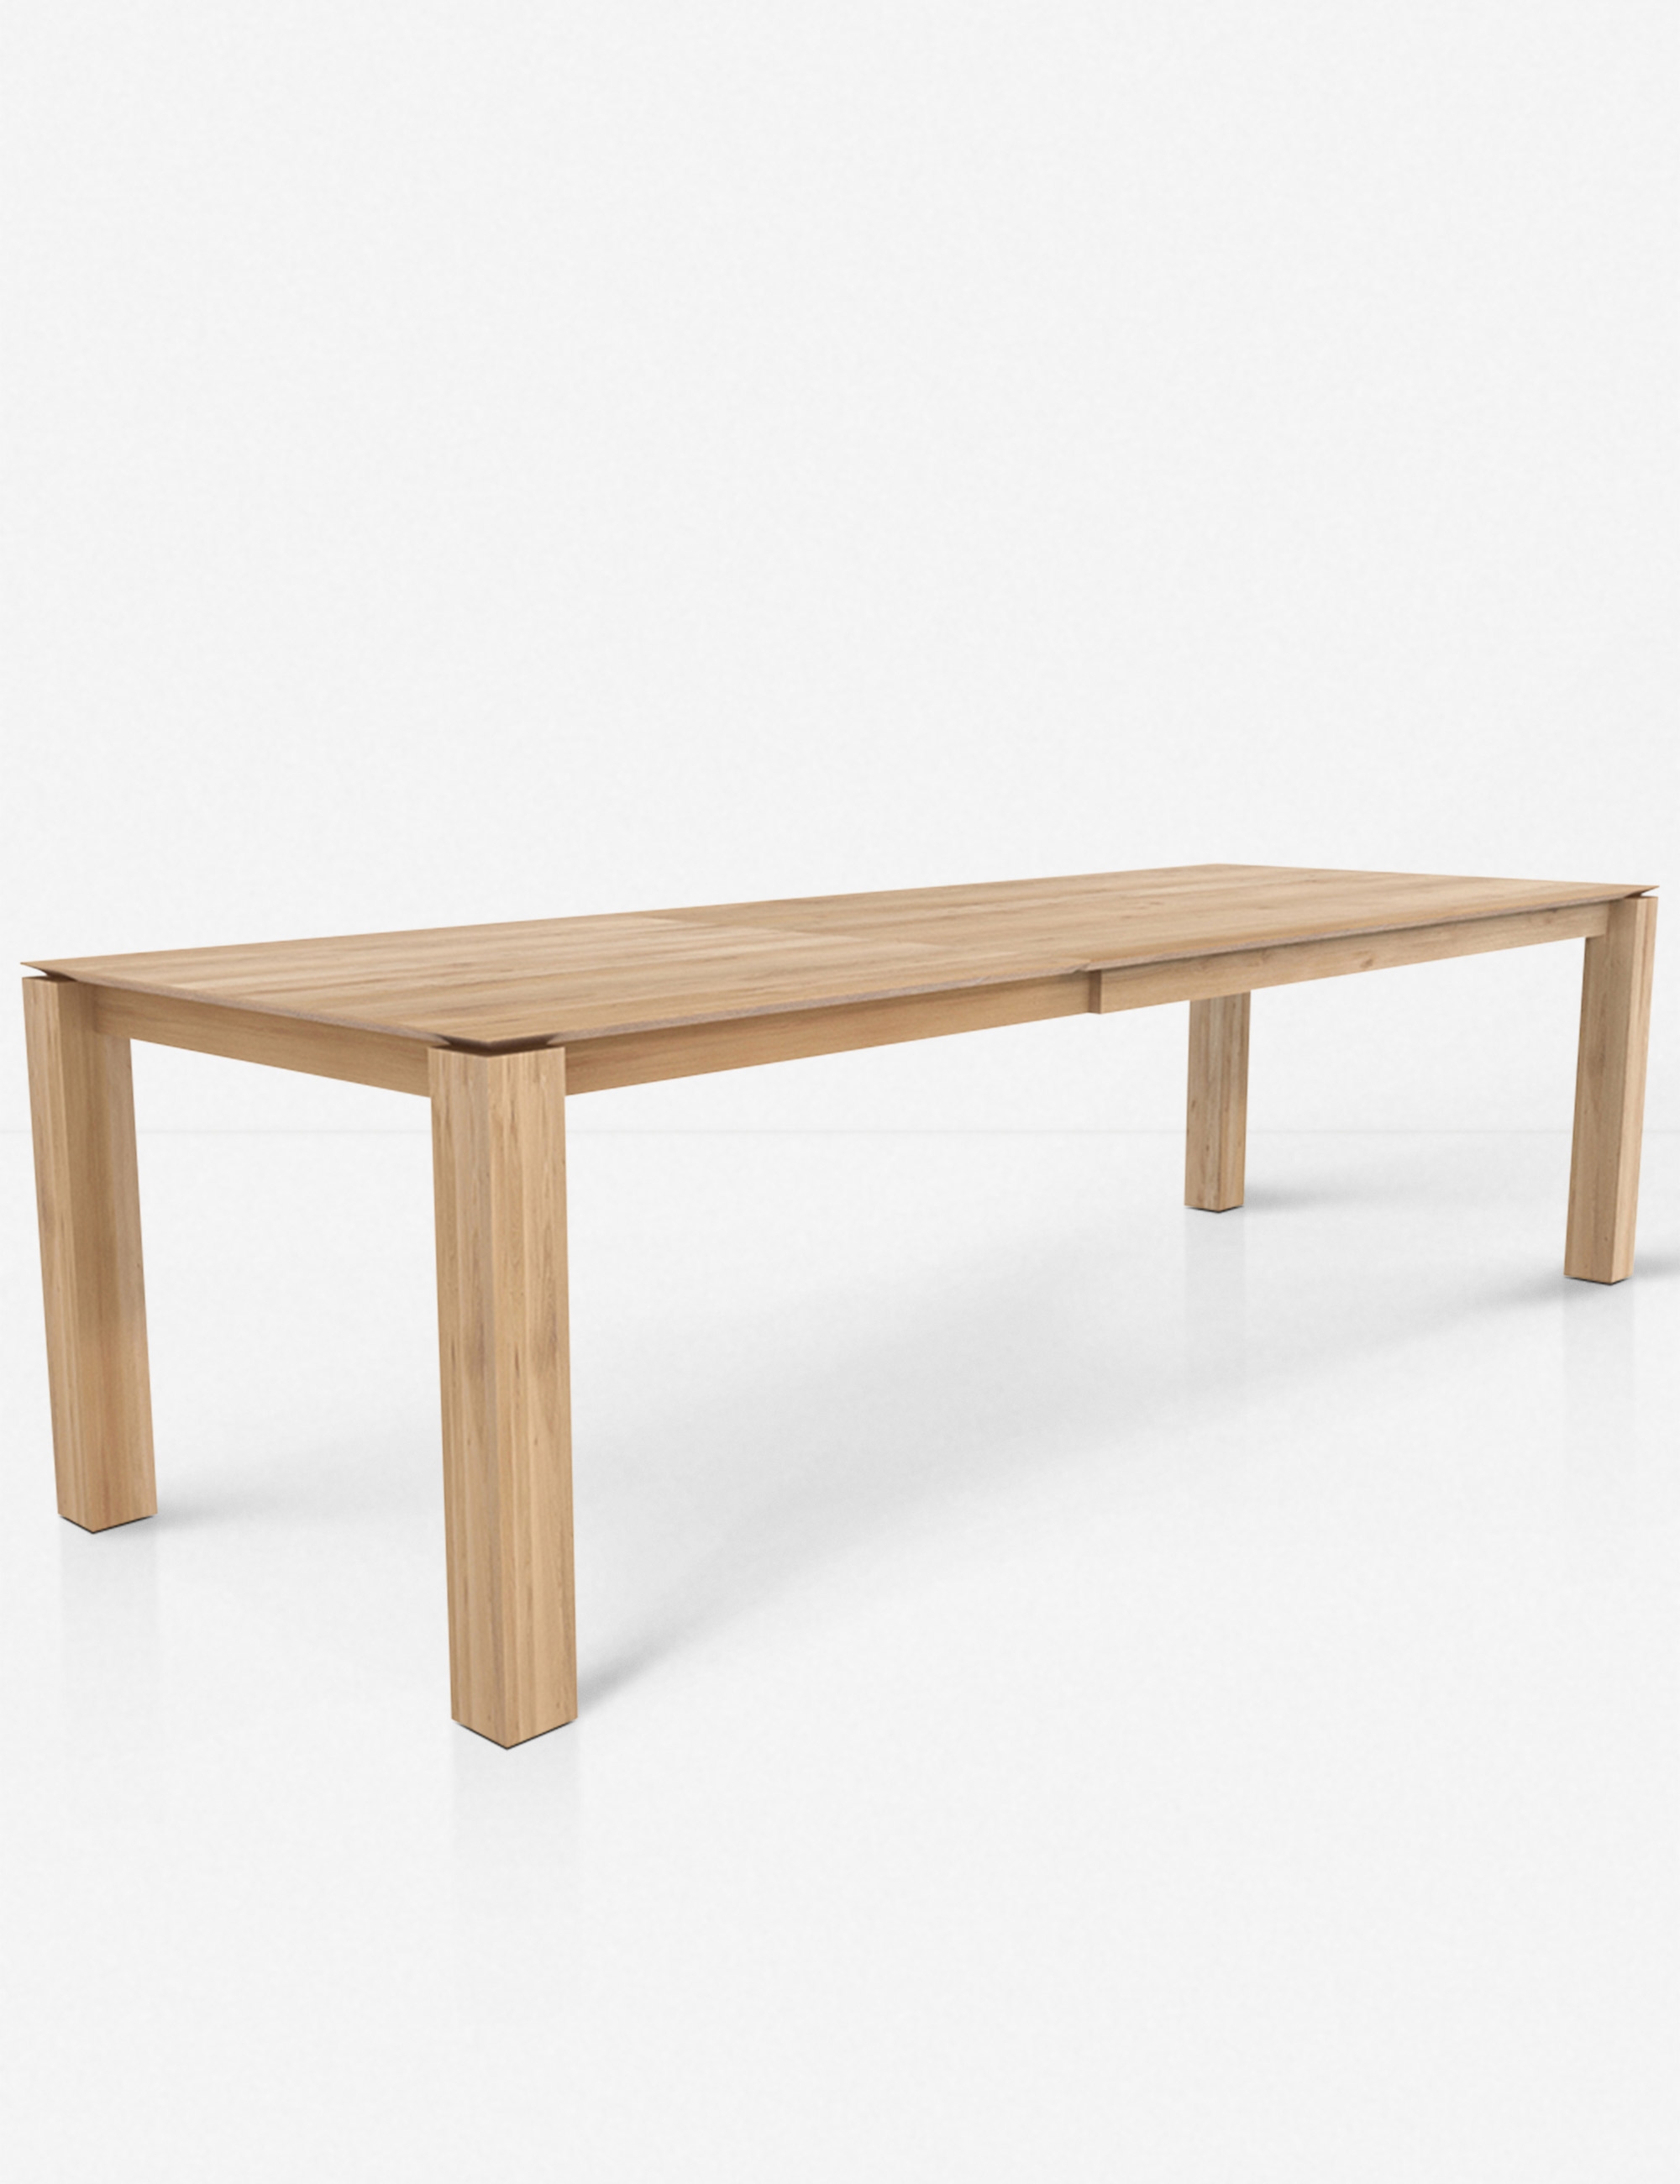 Kaiza Extendable Dining Table - Image 3